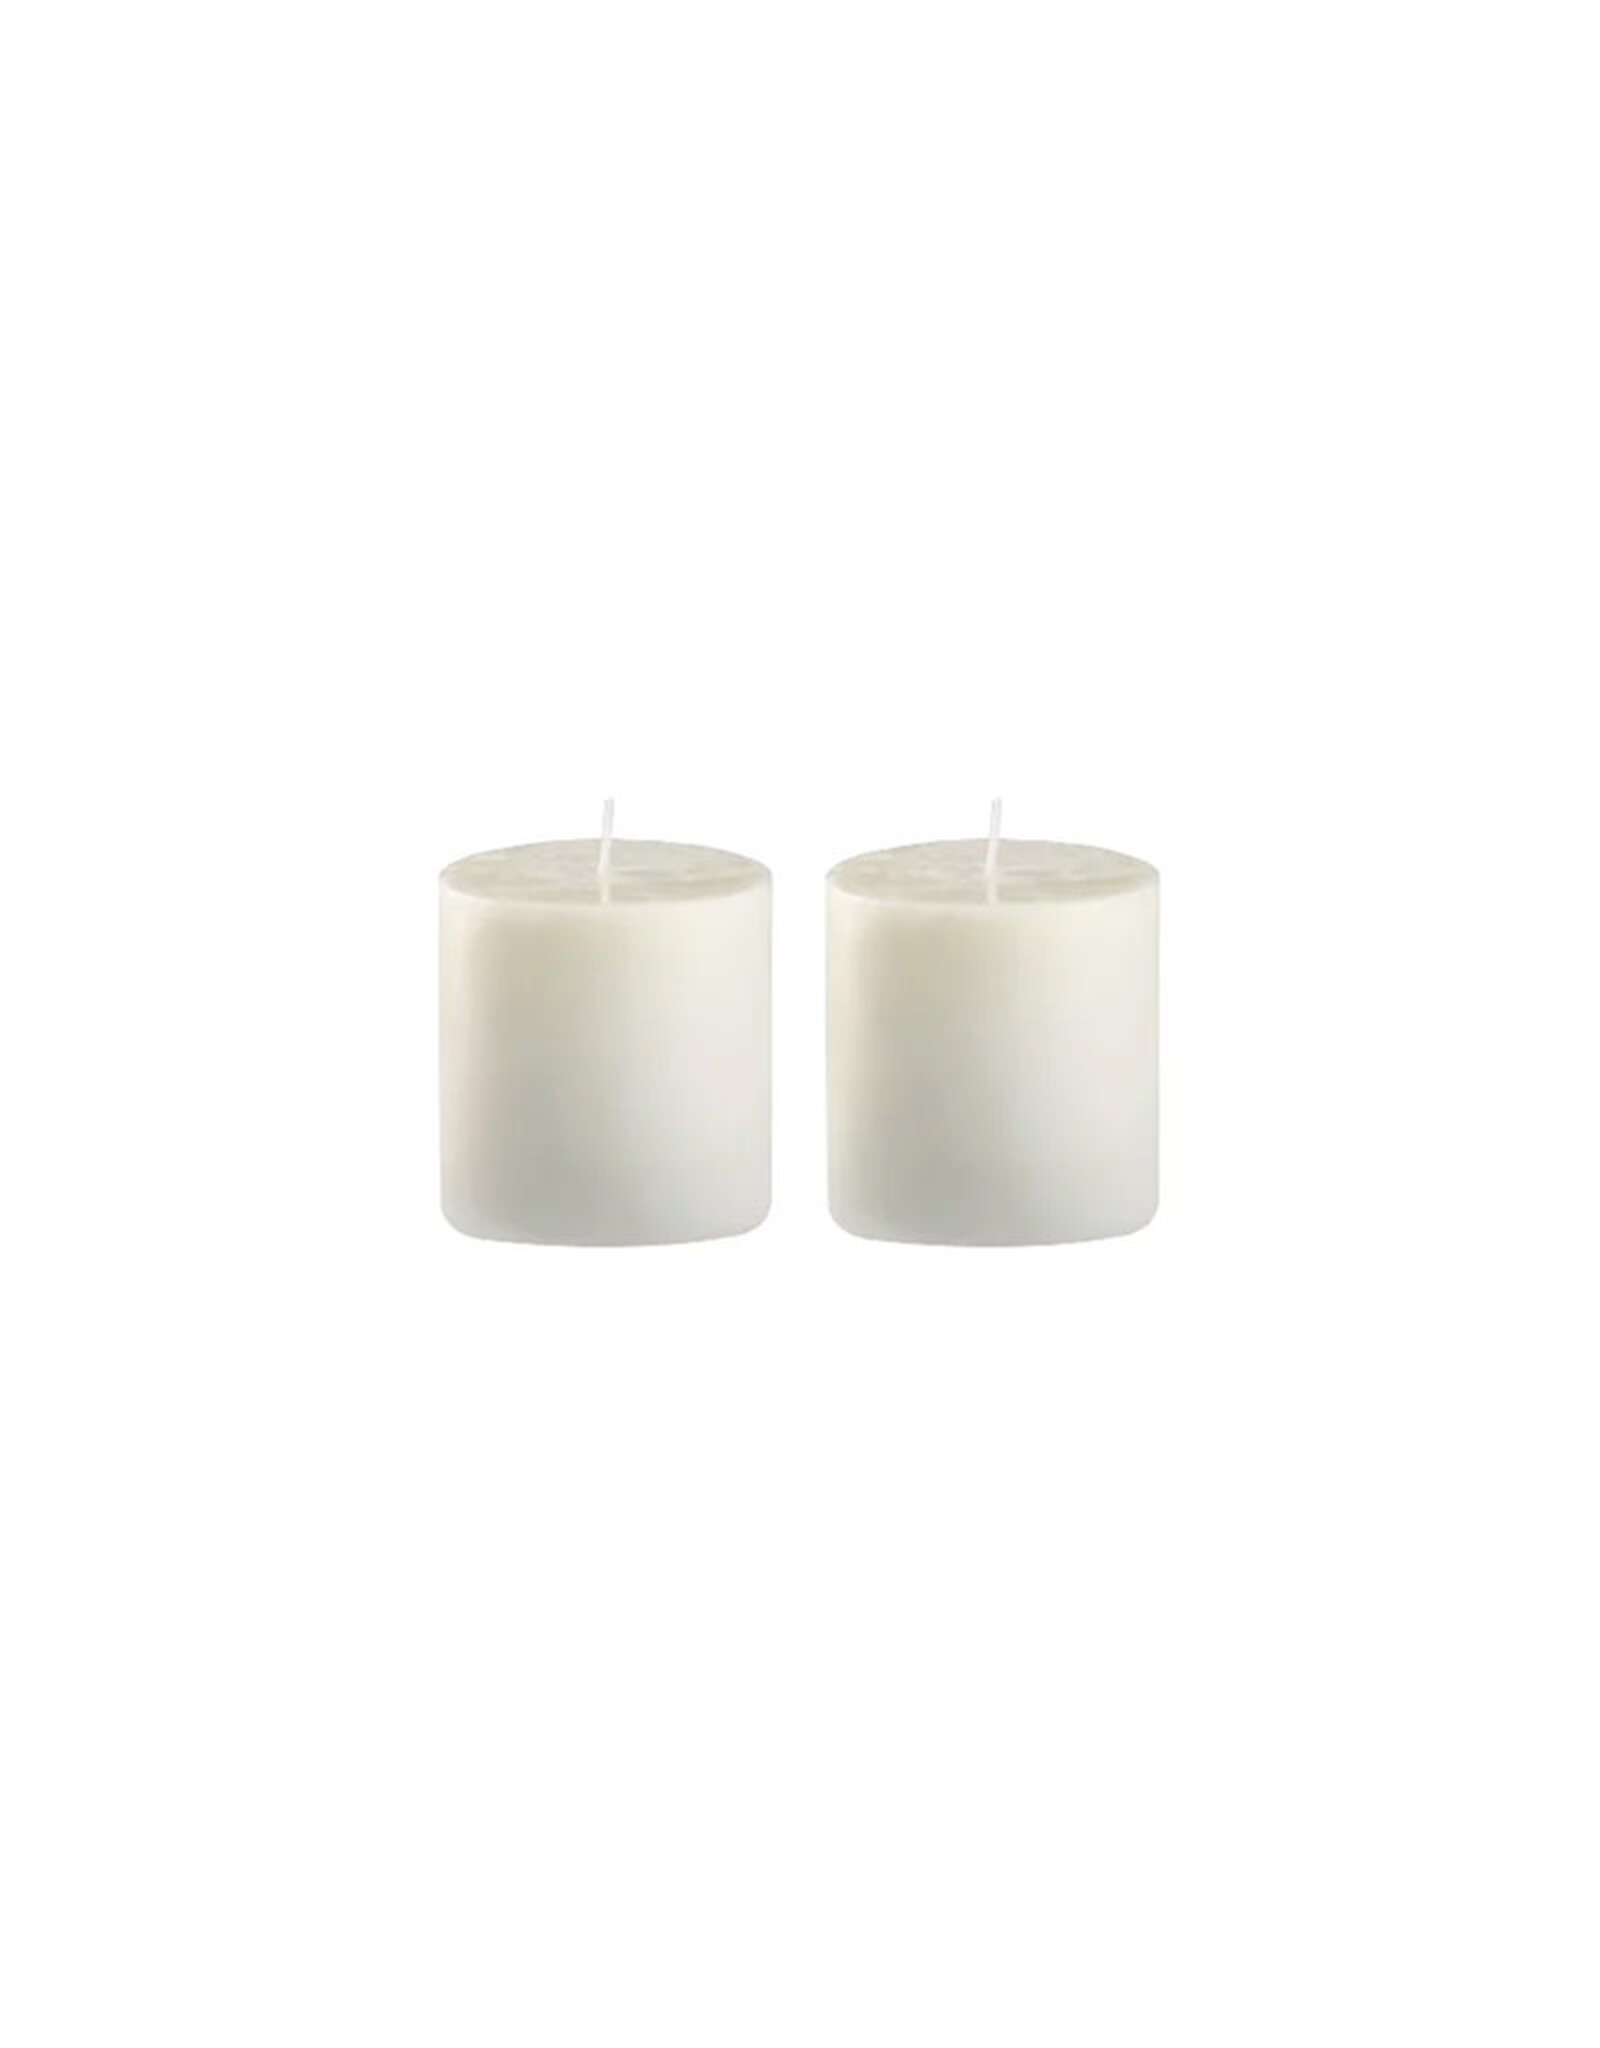 Blomus Valoa Scented Candle Refill - Summer